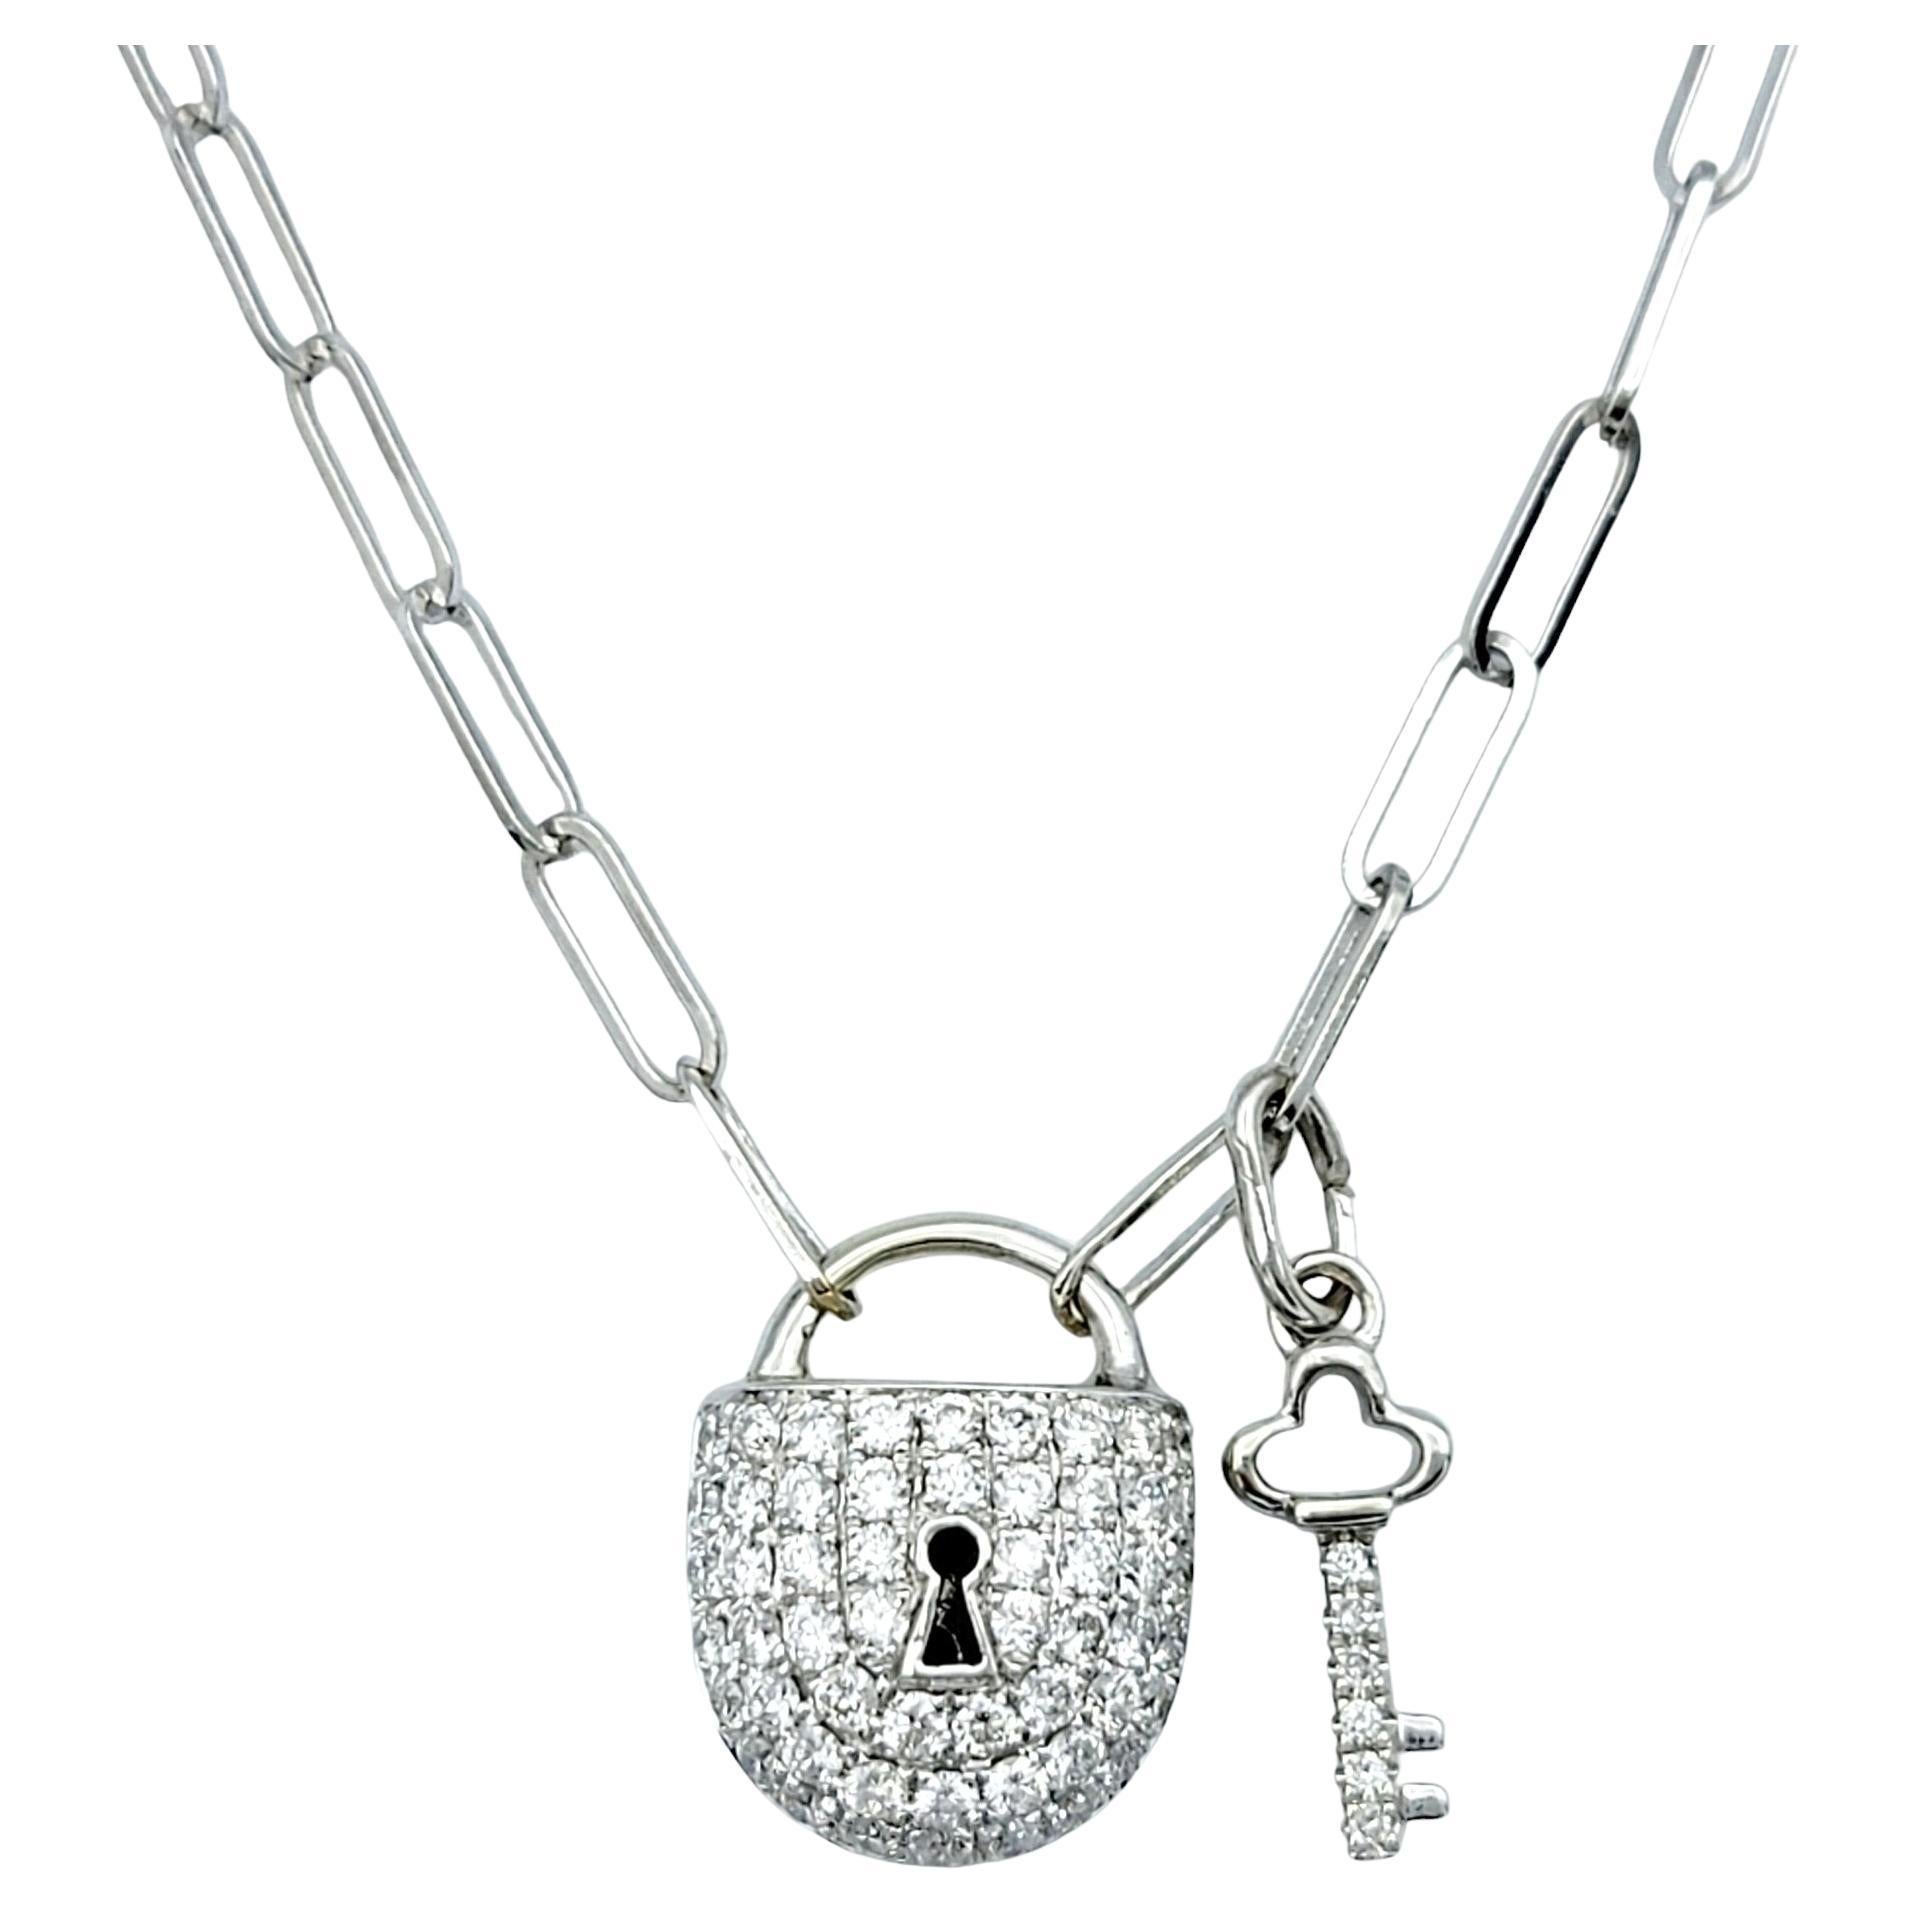 Lock and Key Round Pave Diamond Charm Necklace Set in 18 Karat White Gold For Sale